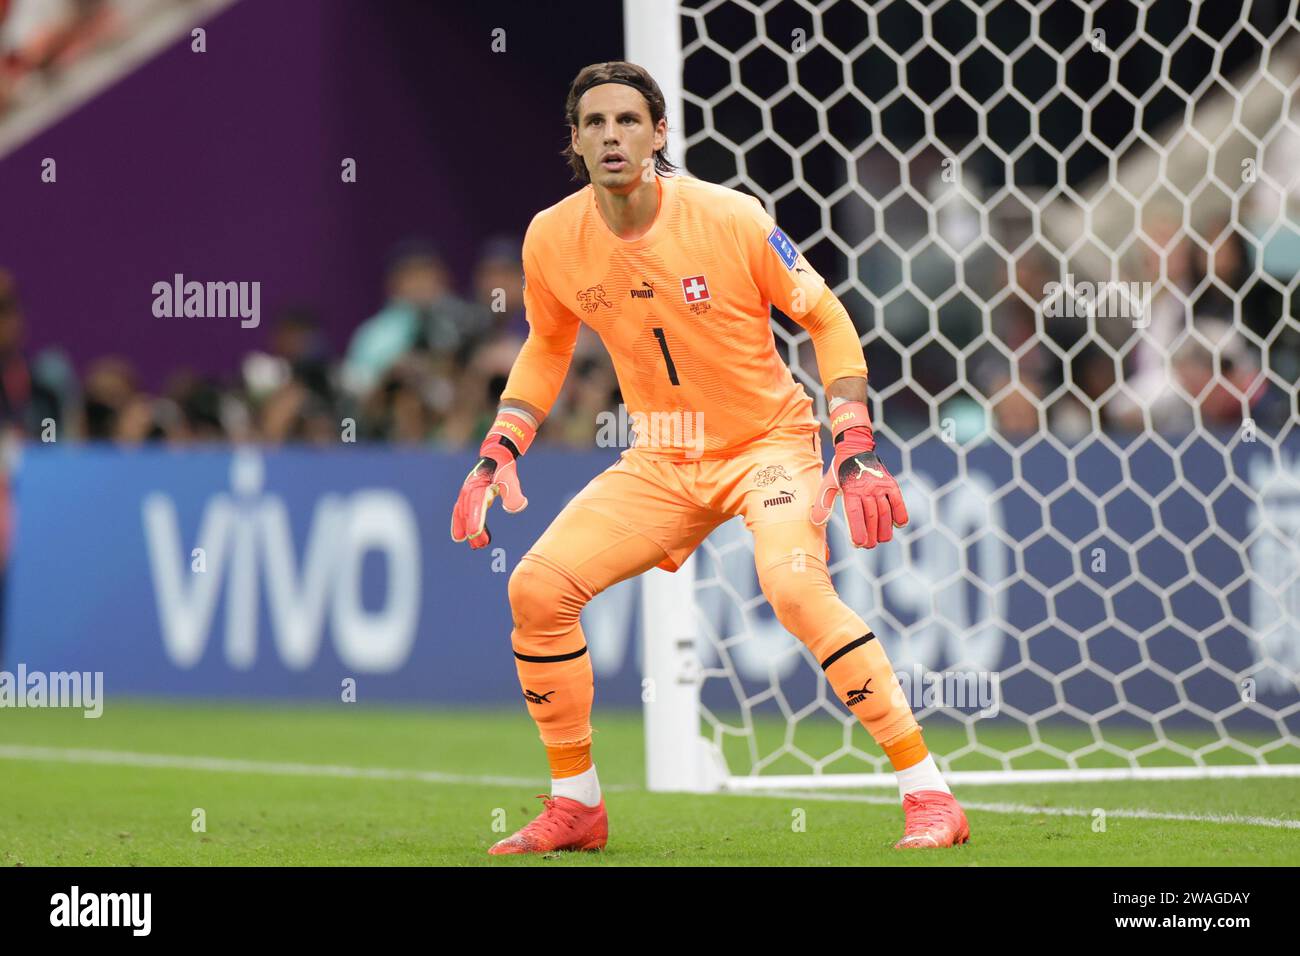 Yann Sommer of Switzerland seen in action during the FIFA World Cup Qatar 2022 match between Portugal and Switzerland at Lusail Stadium. Final score: Portugal 6:1 Switzerland. Stock Photo